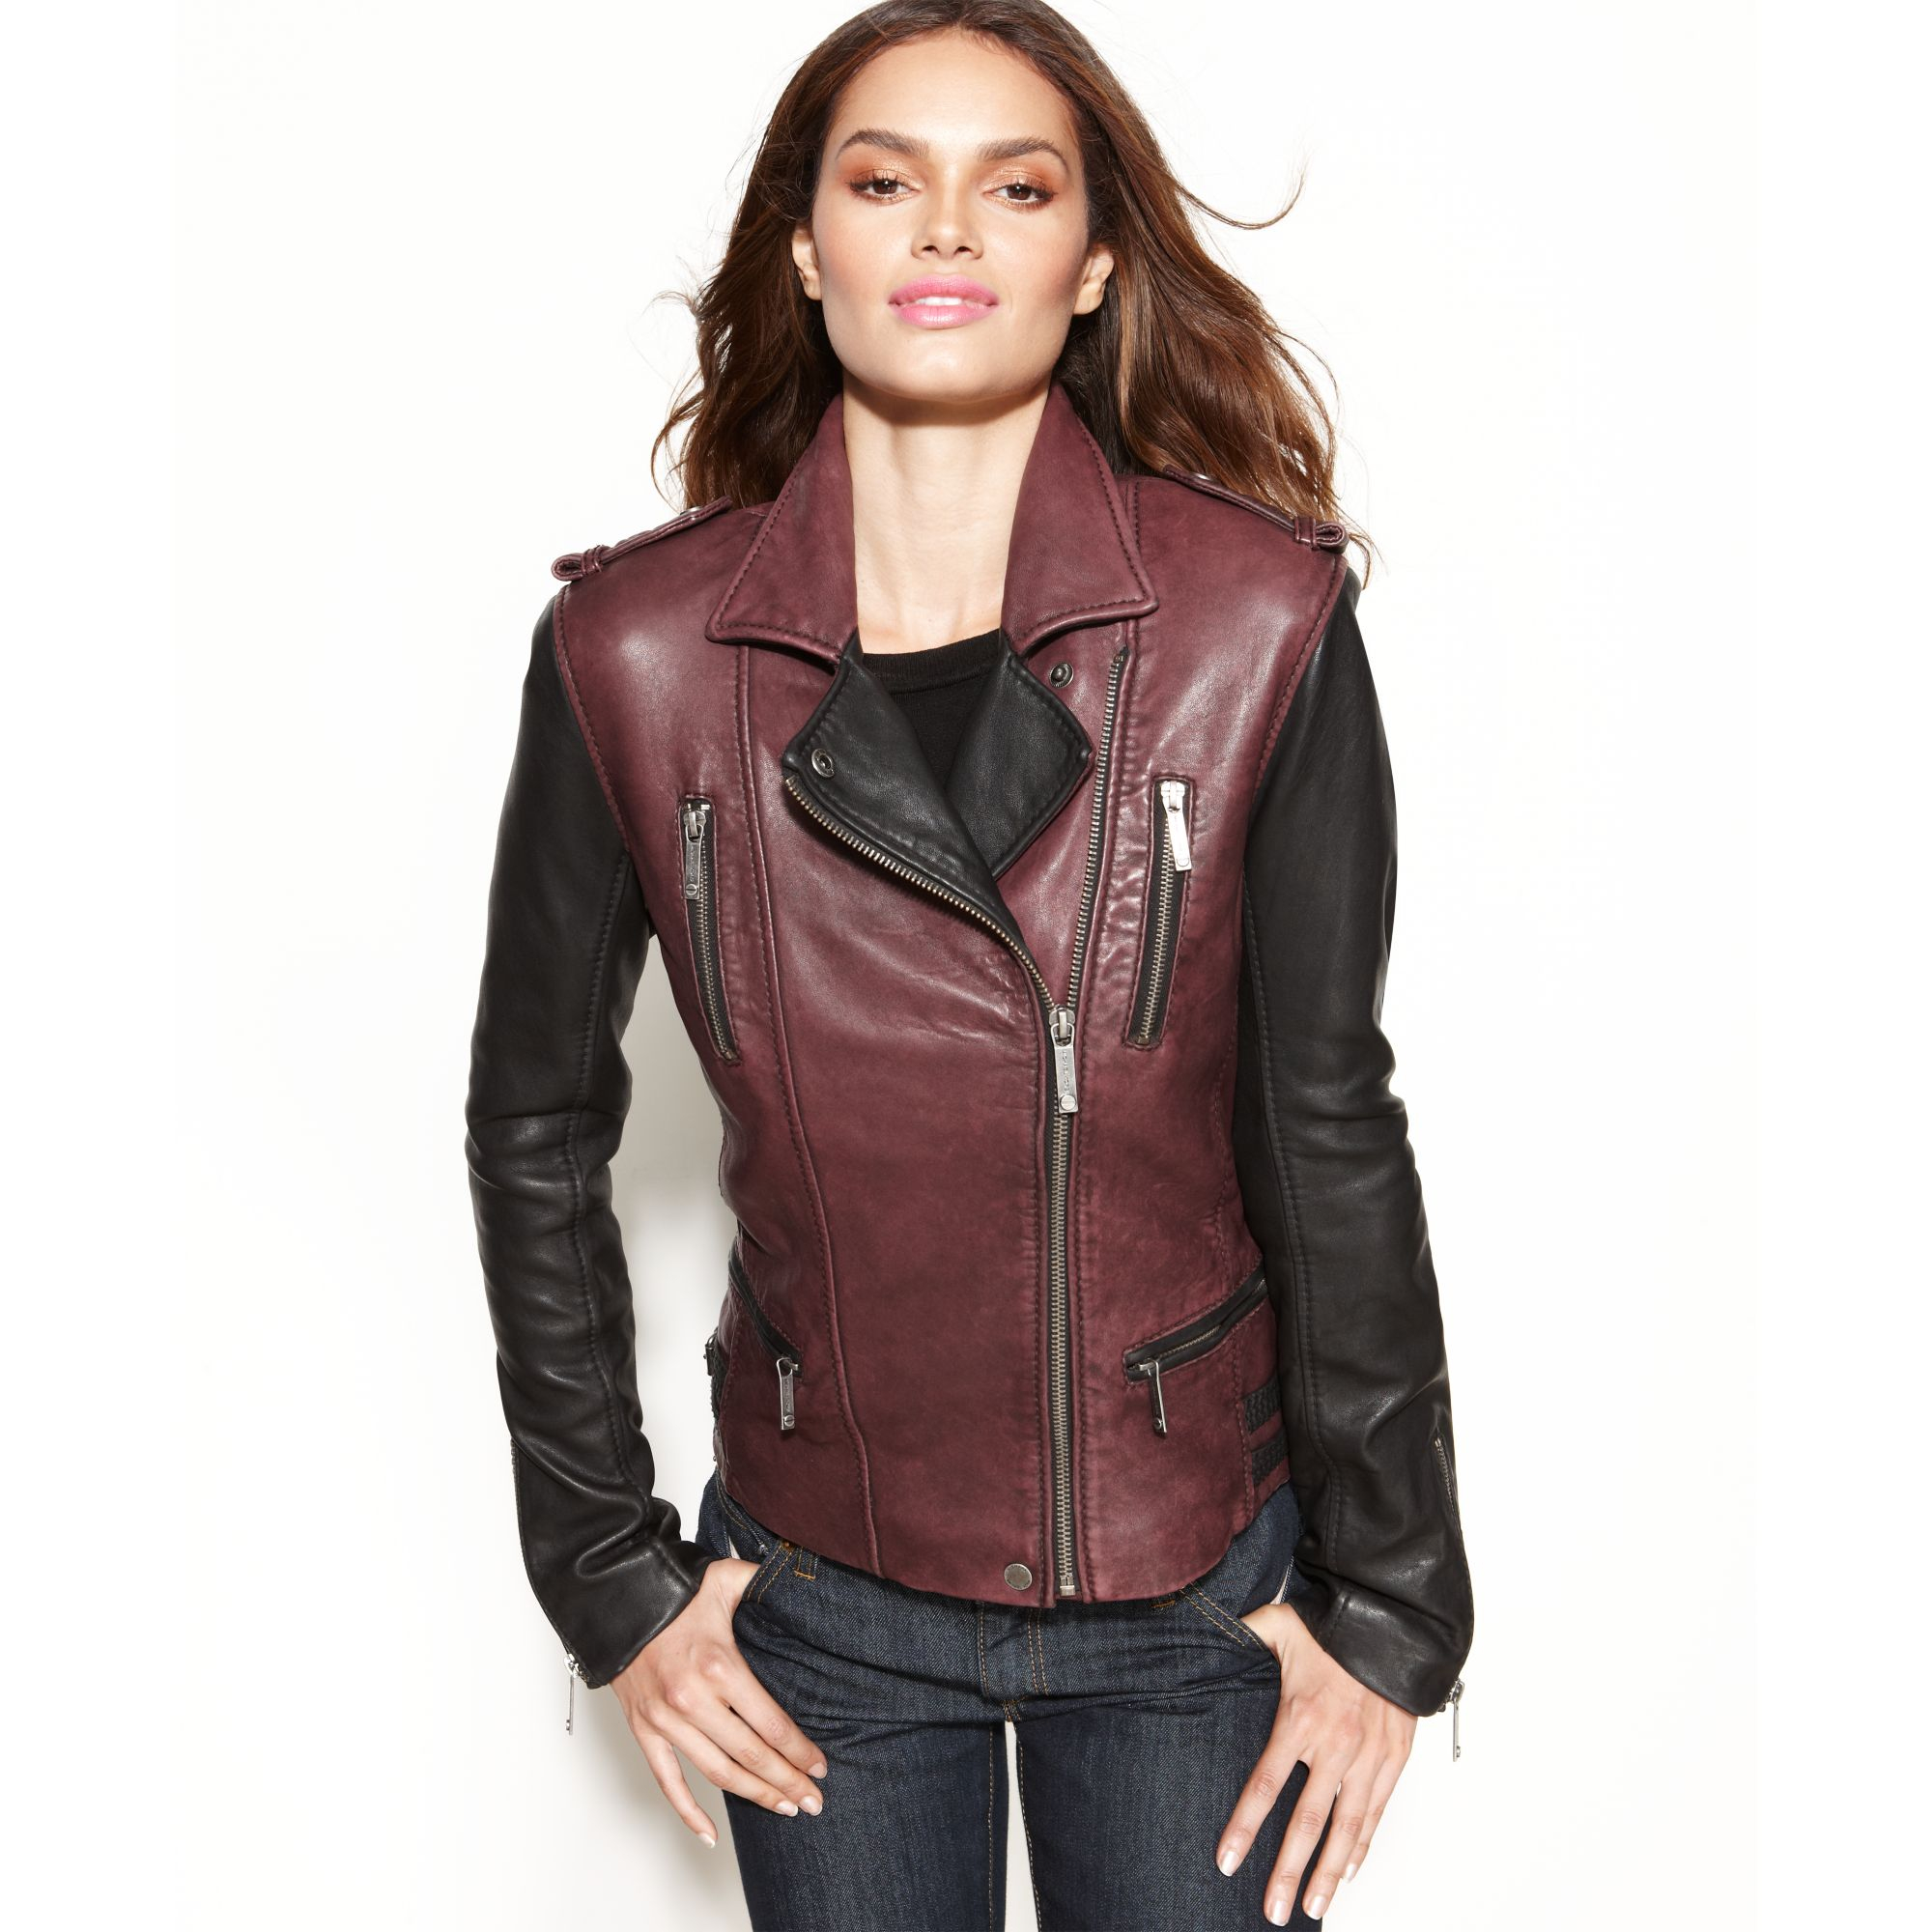 Lyst - Michael Kors Leather Colorblock Motorcycle Jacket in Red